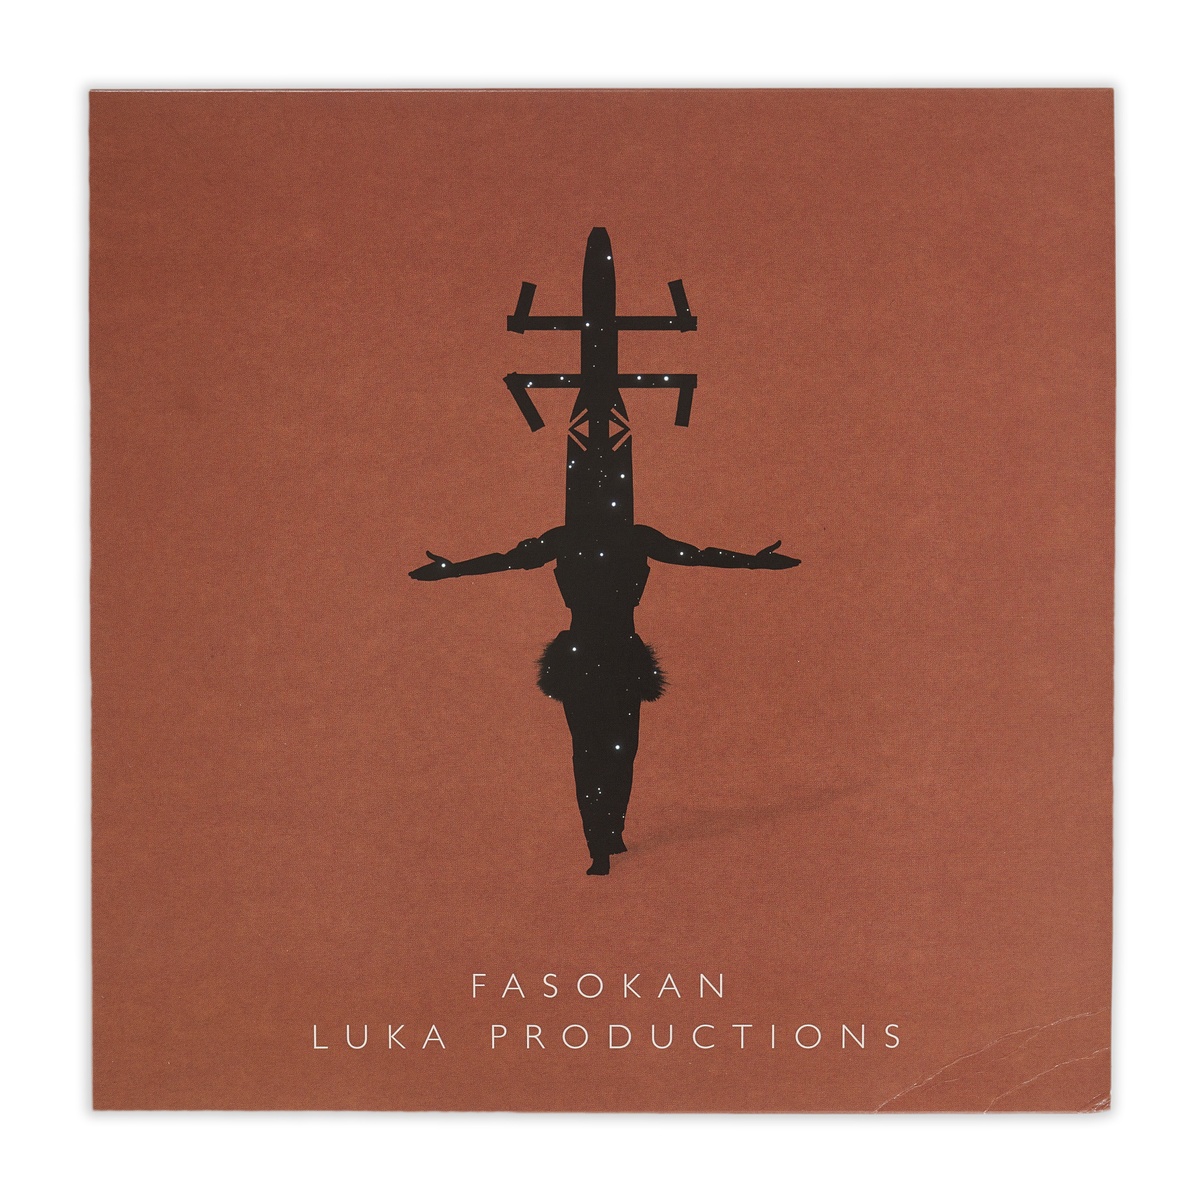 Photograph of the cover of Luka Productions' 12" vinyl record 'Fakosan'.
